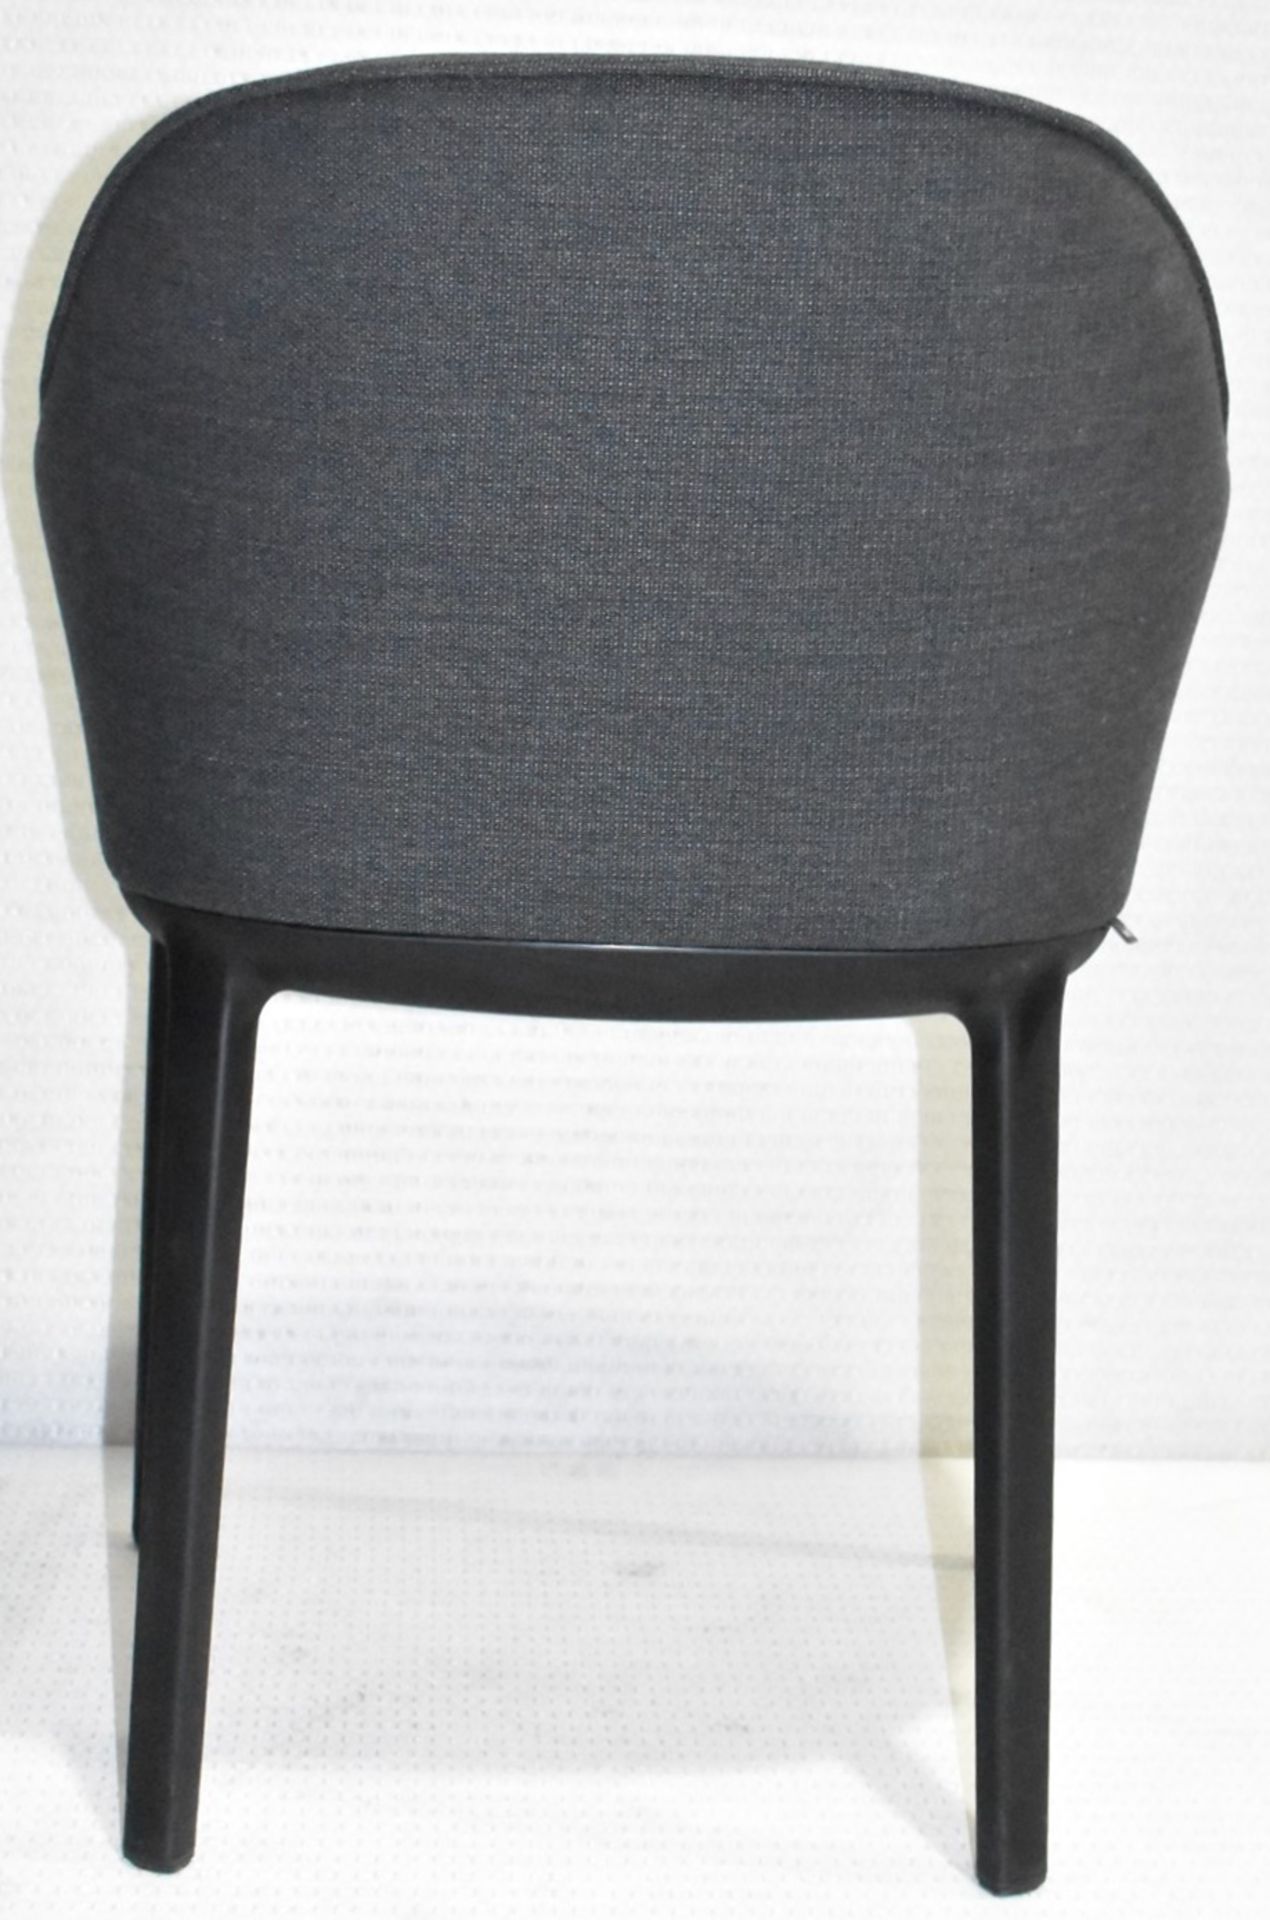 1 x VITRA 'Softshell' Fabric Upholstered Designer Plastic Armchair, in Anthracite Grey - RRP £885.00 - Image 4 of 9